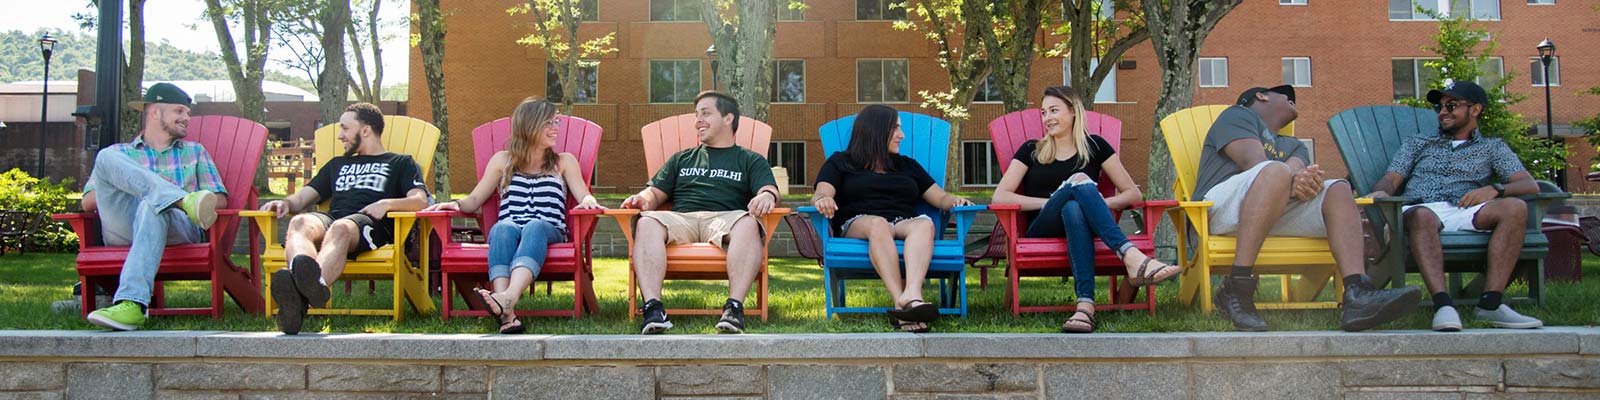 Students relaxing in front of a dorm in Adirondack chairs